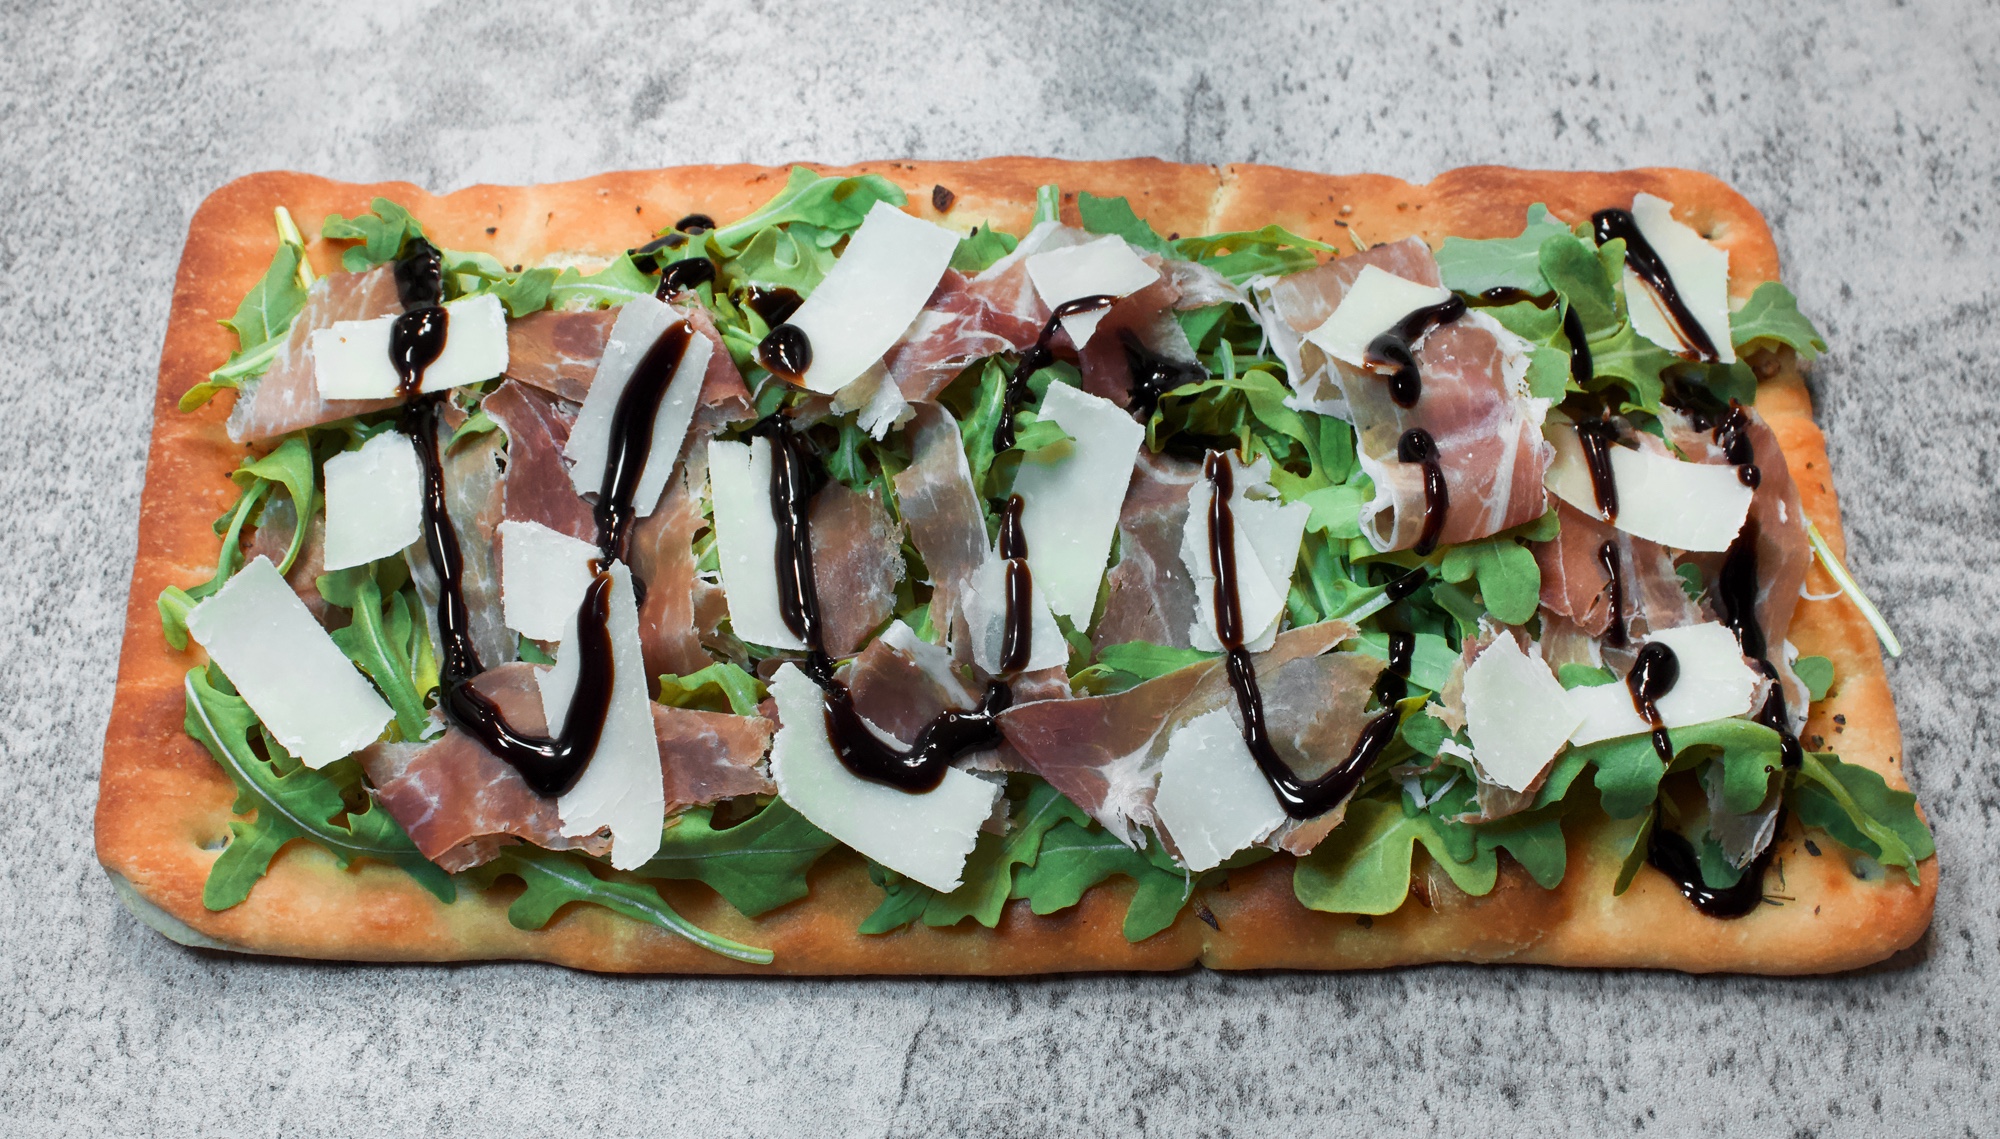 Flatbread layered with fresh arugula, slices of prosciutto, shaved Parmesan cheese & balsamic glaze 